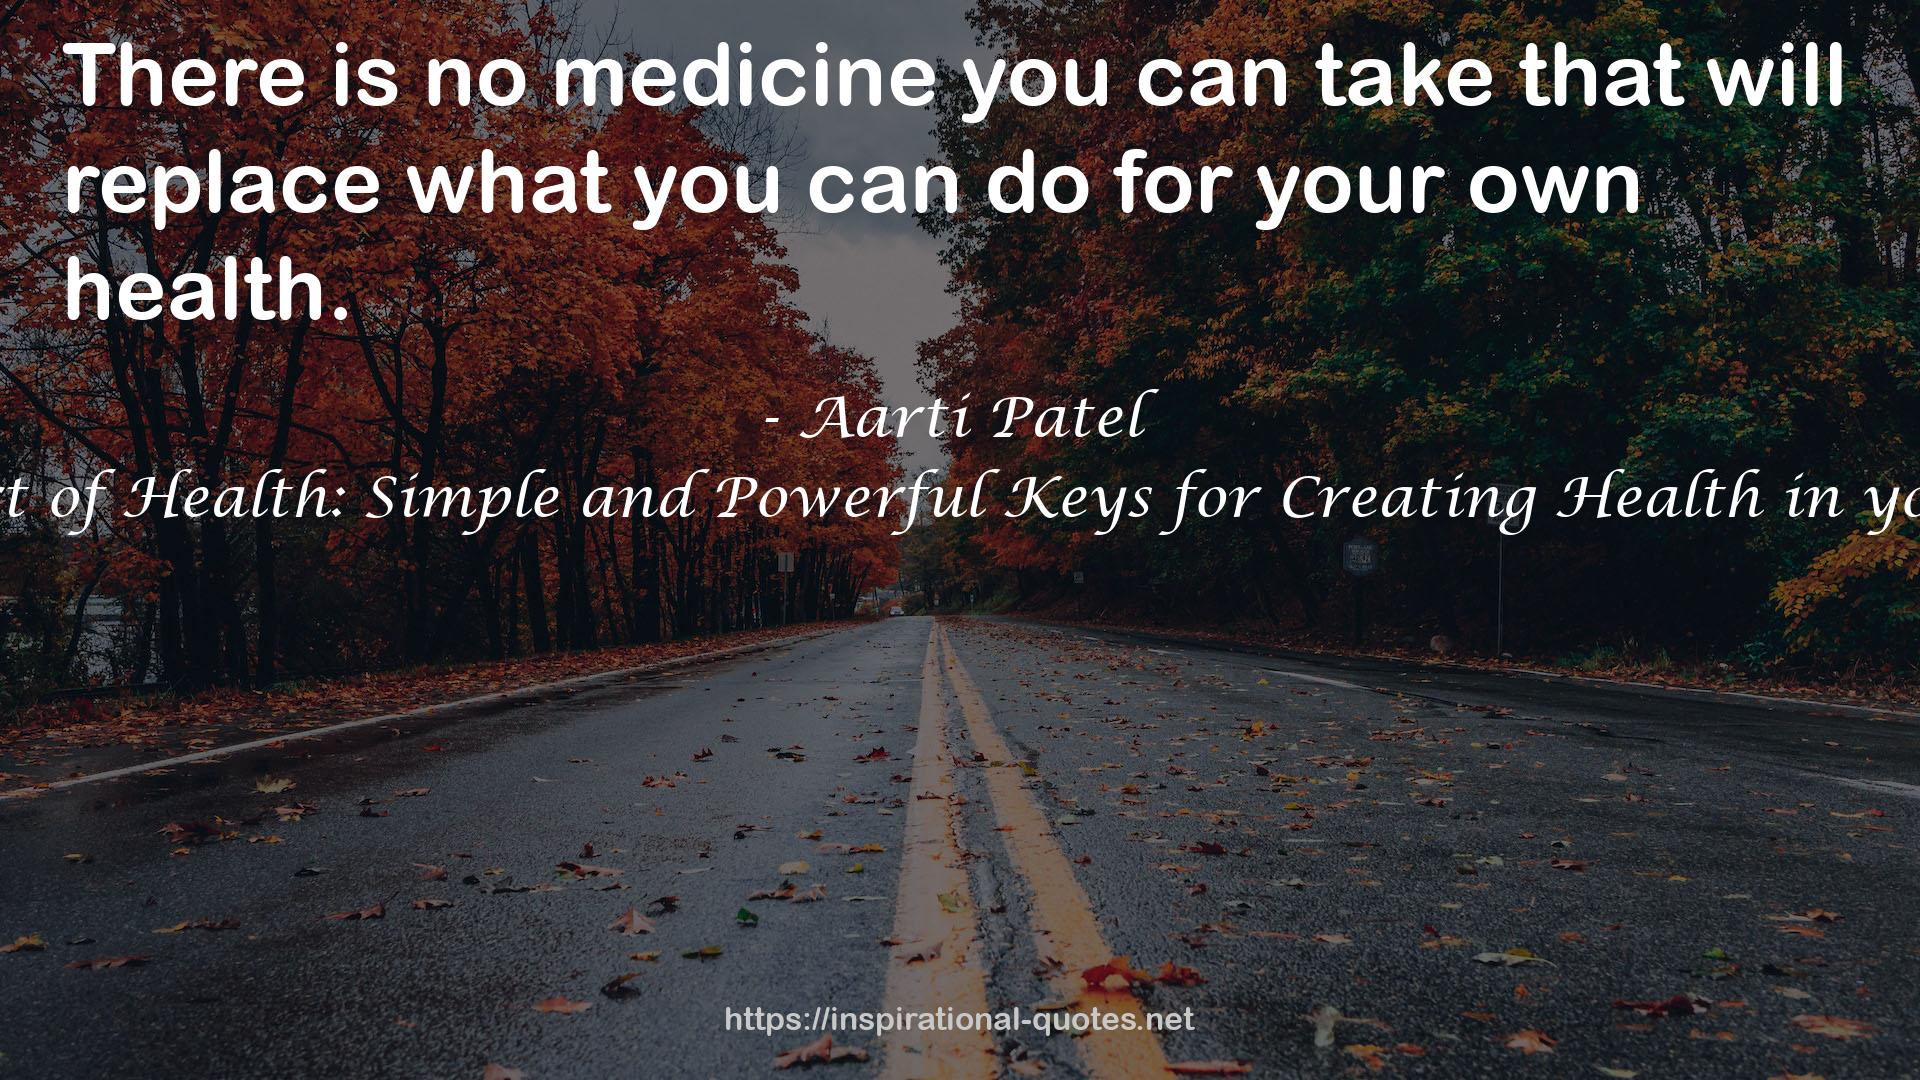 The Art of Health: Simple and Powerful Keys for Creating Health in your Life QUOTES